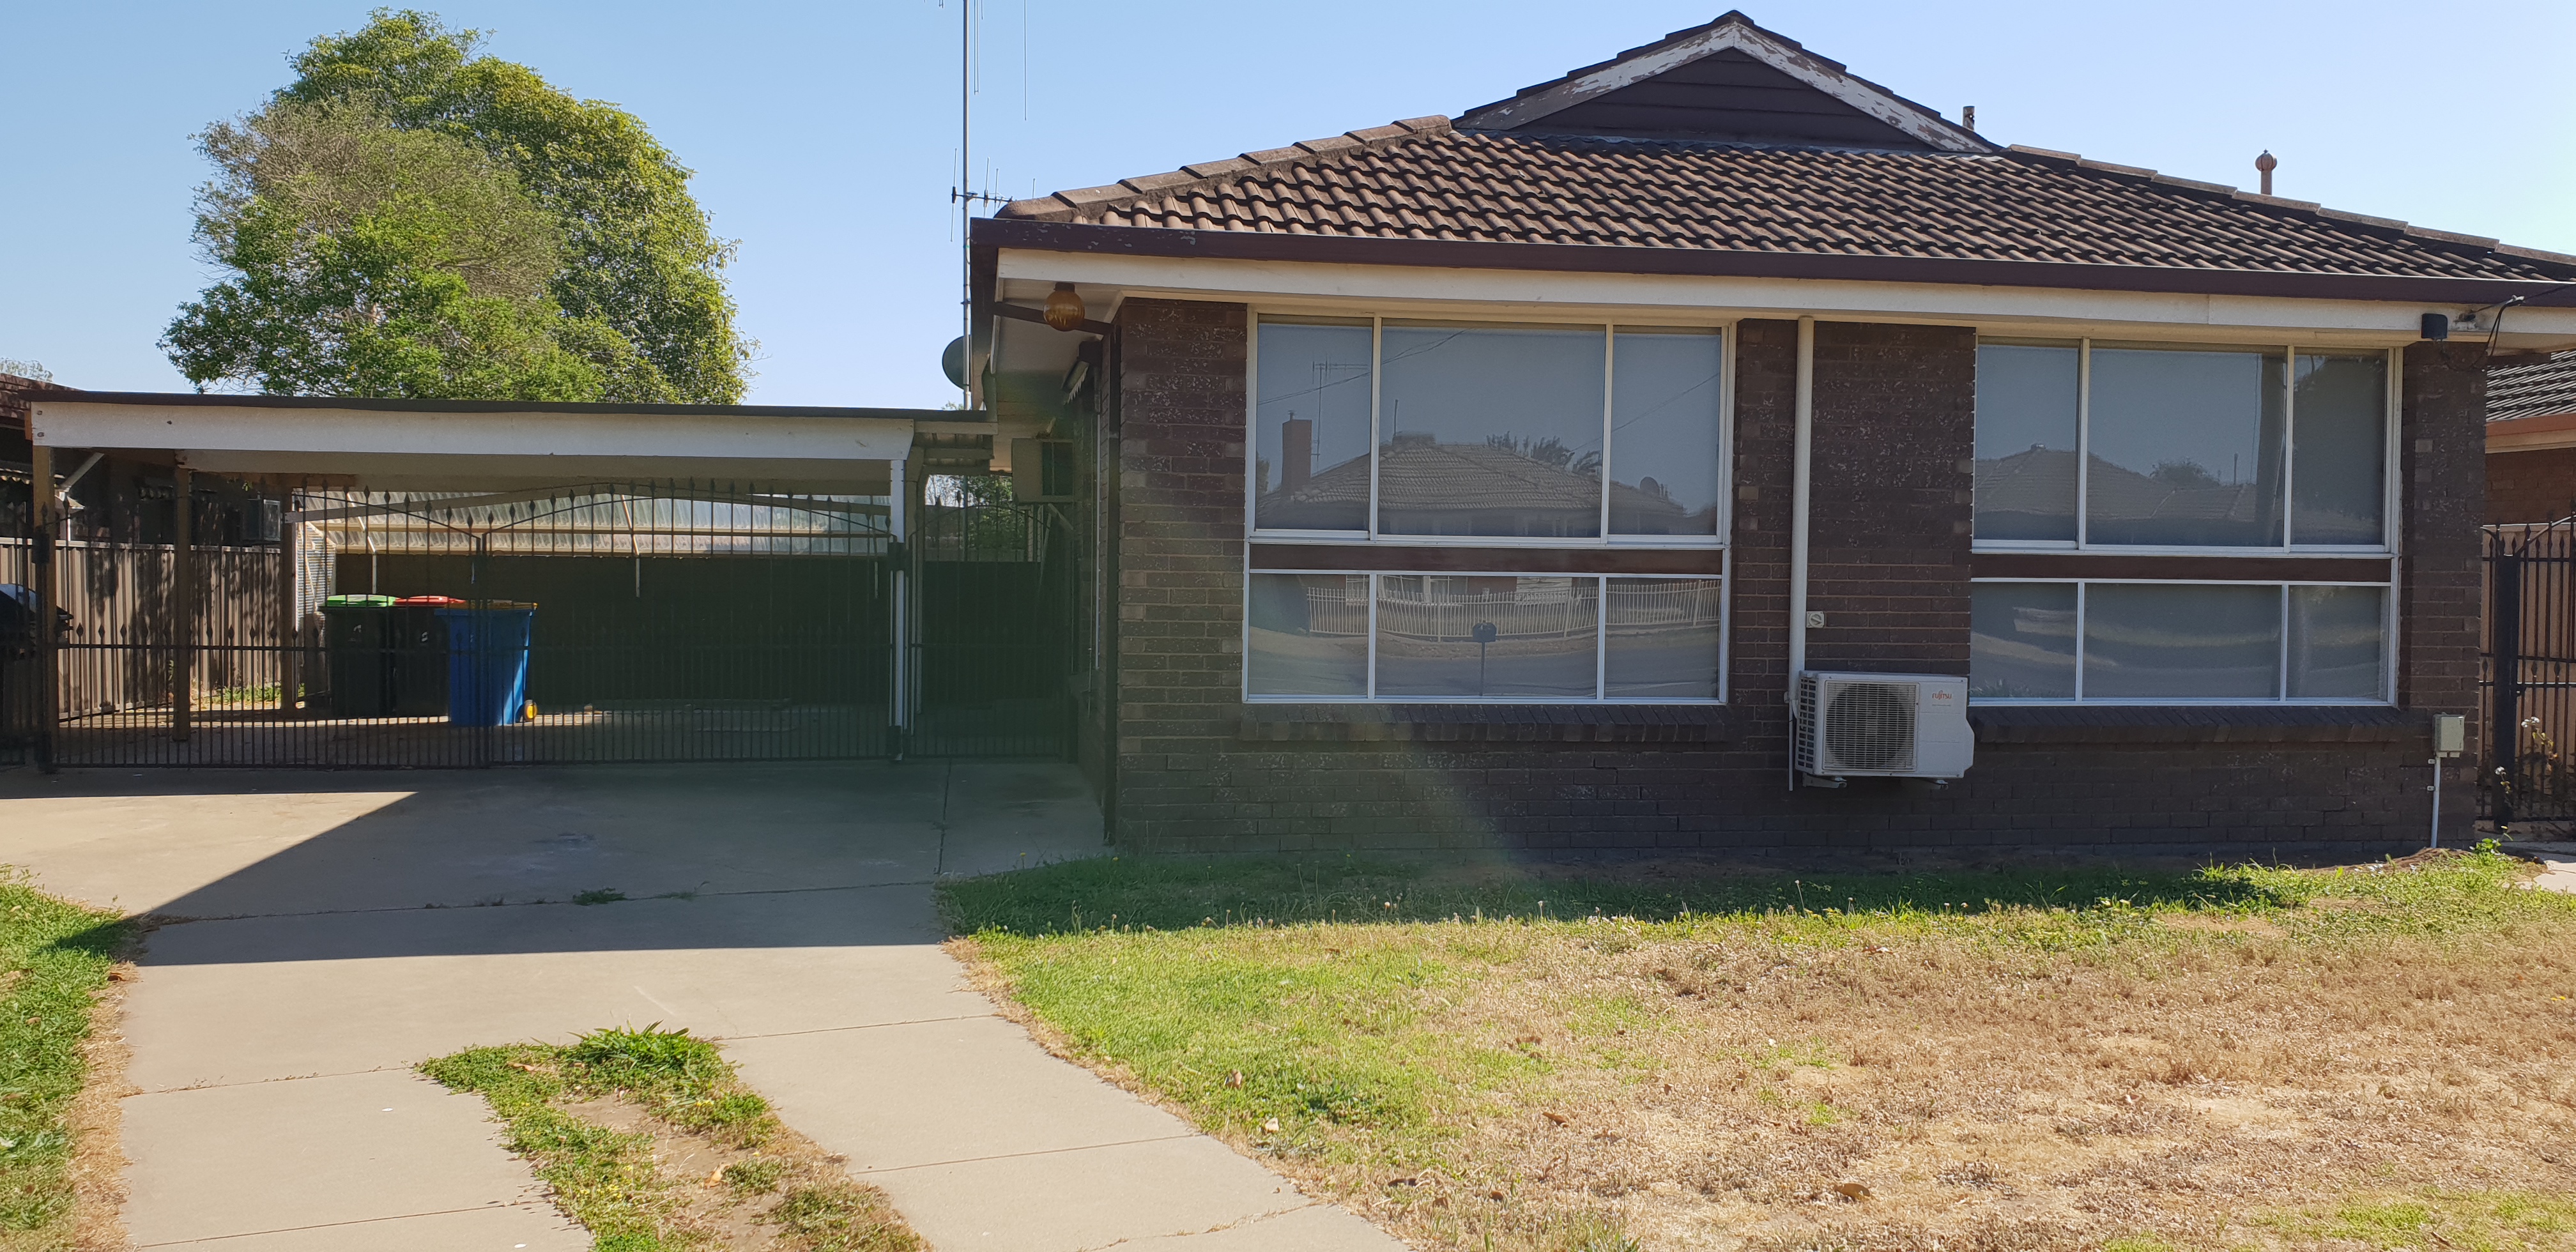 3 BEDROOM HOME IN SOUTH SHEPPARTON